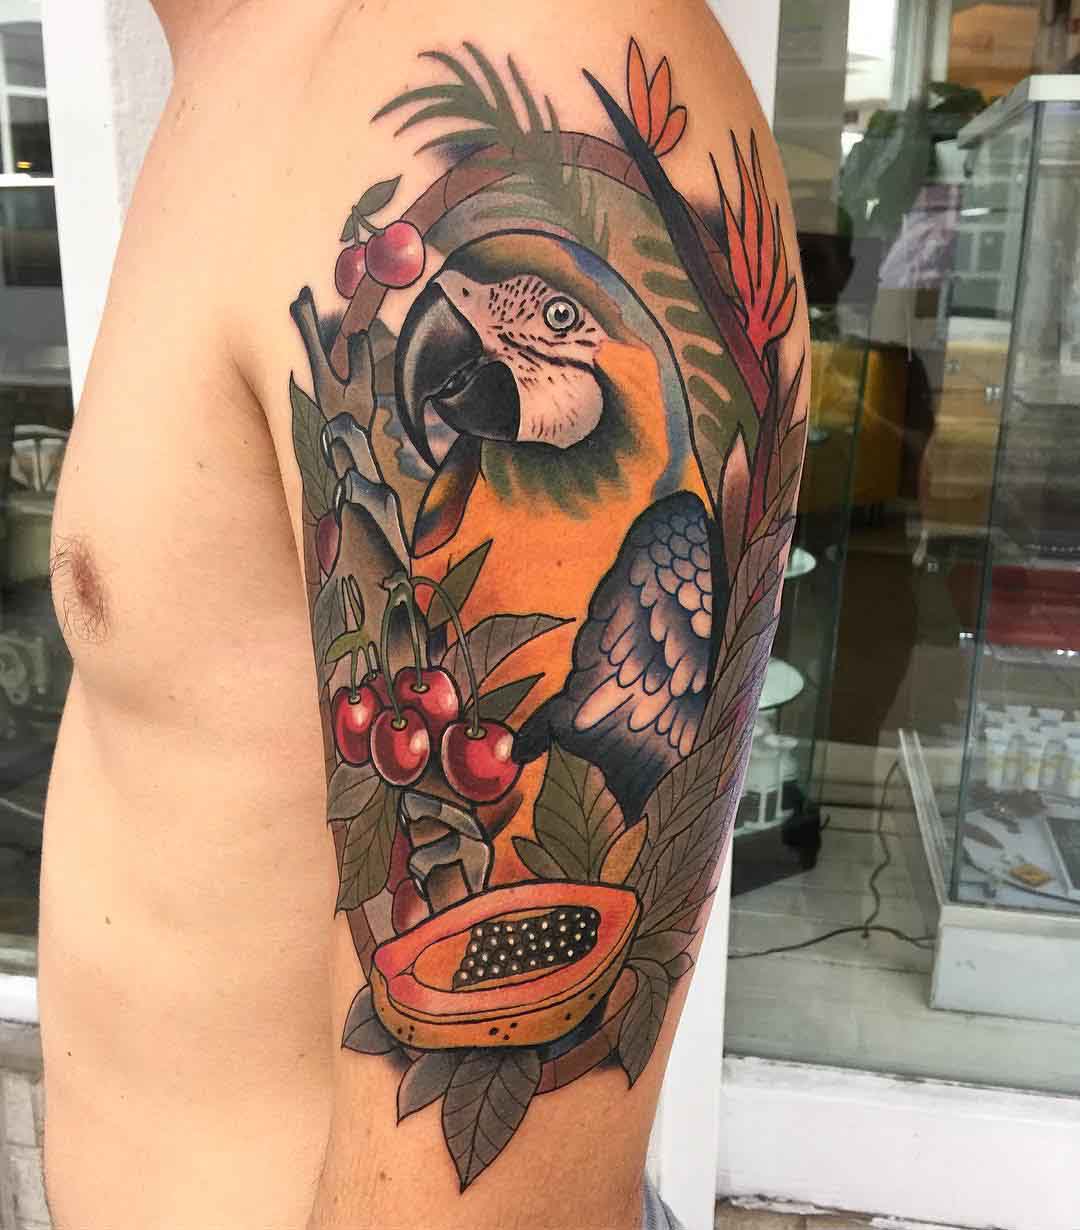 parrot tattoo on shoulder with fruits